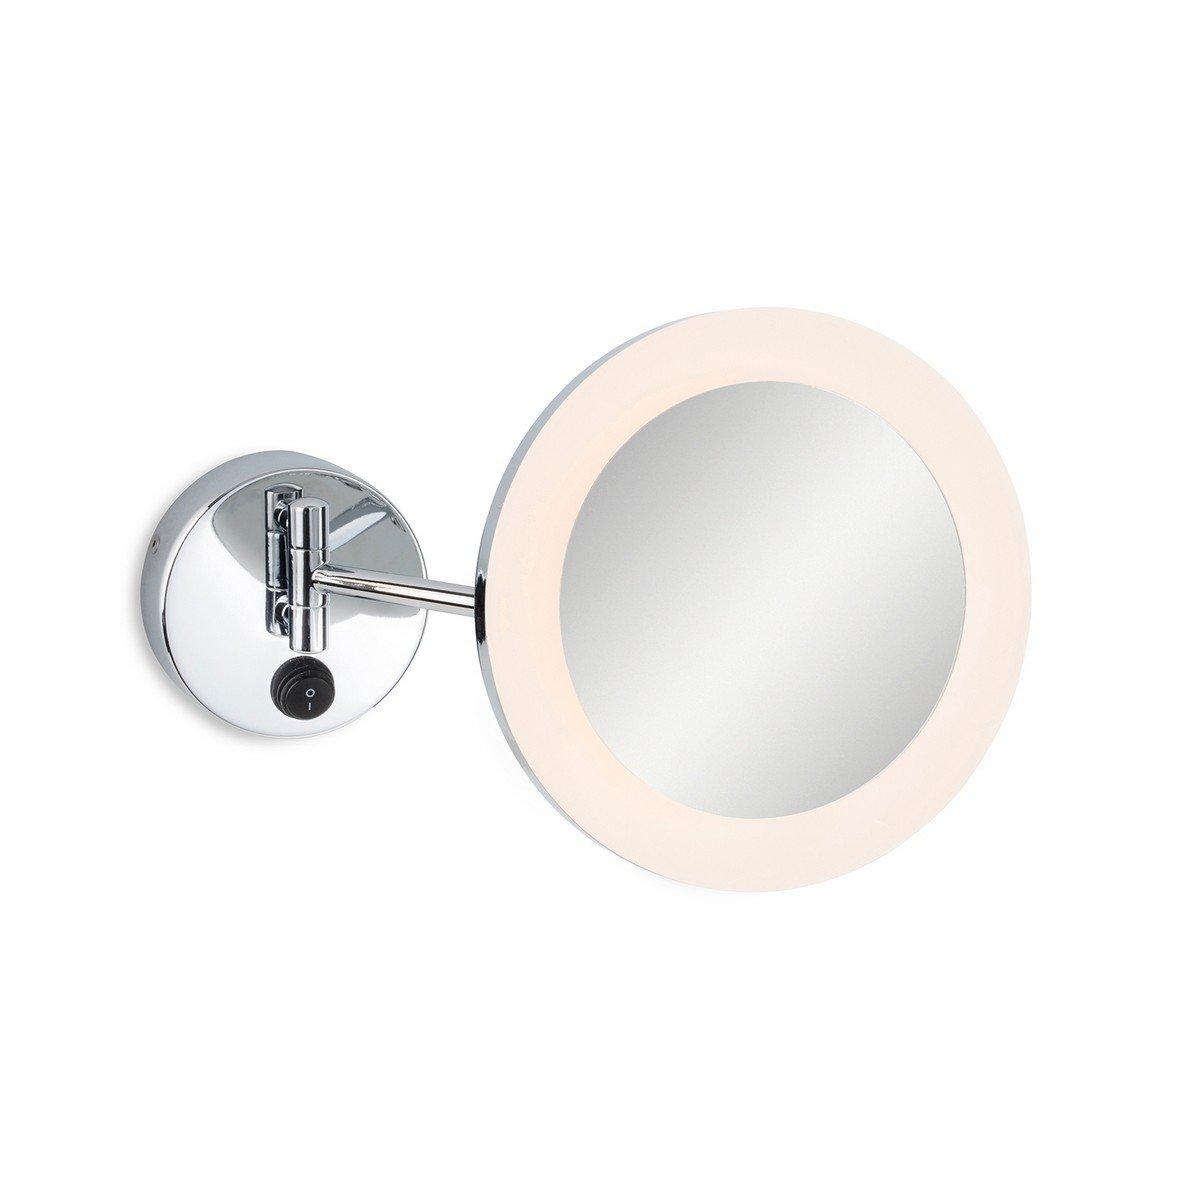 Lily Bathroom Adjustable Arm LED Magnifying Mirror Light Chrome IP44 3x Magnification